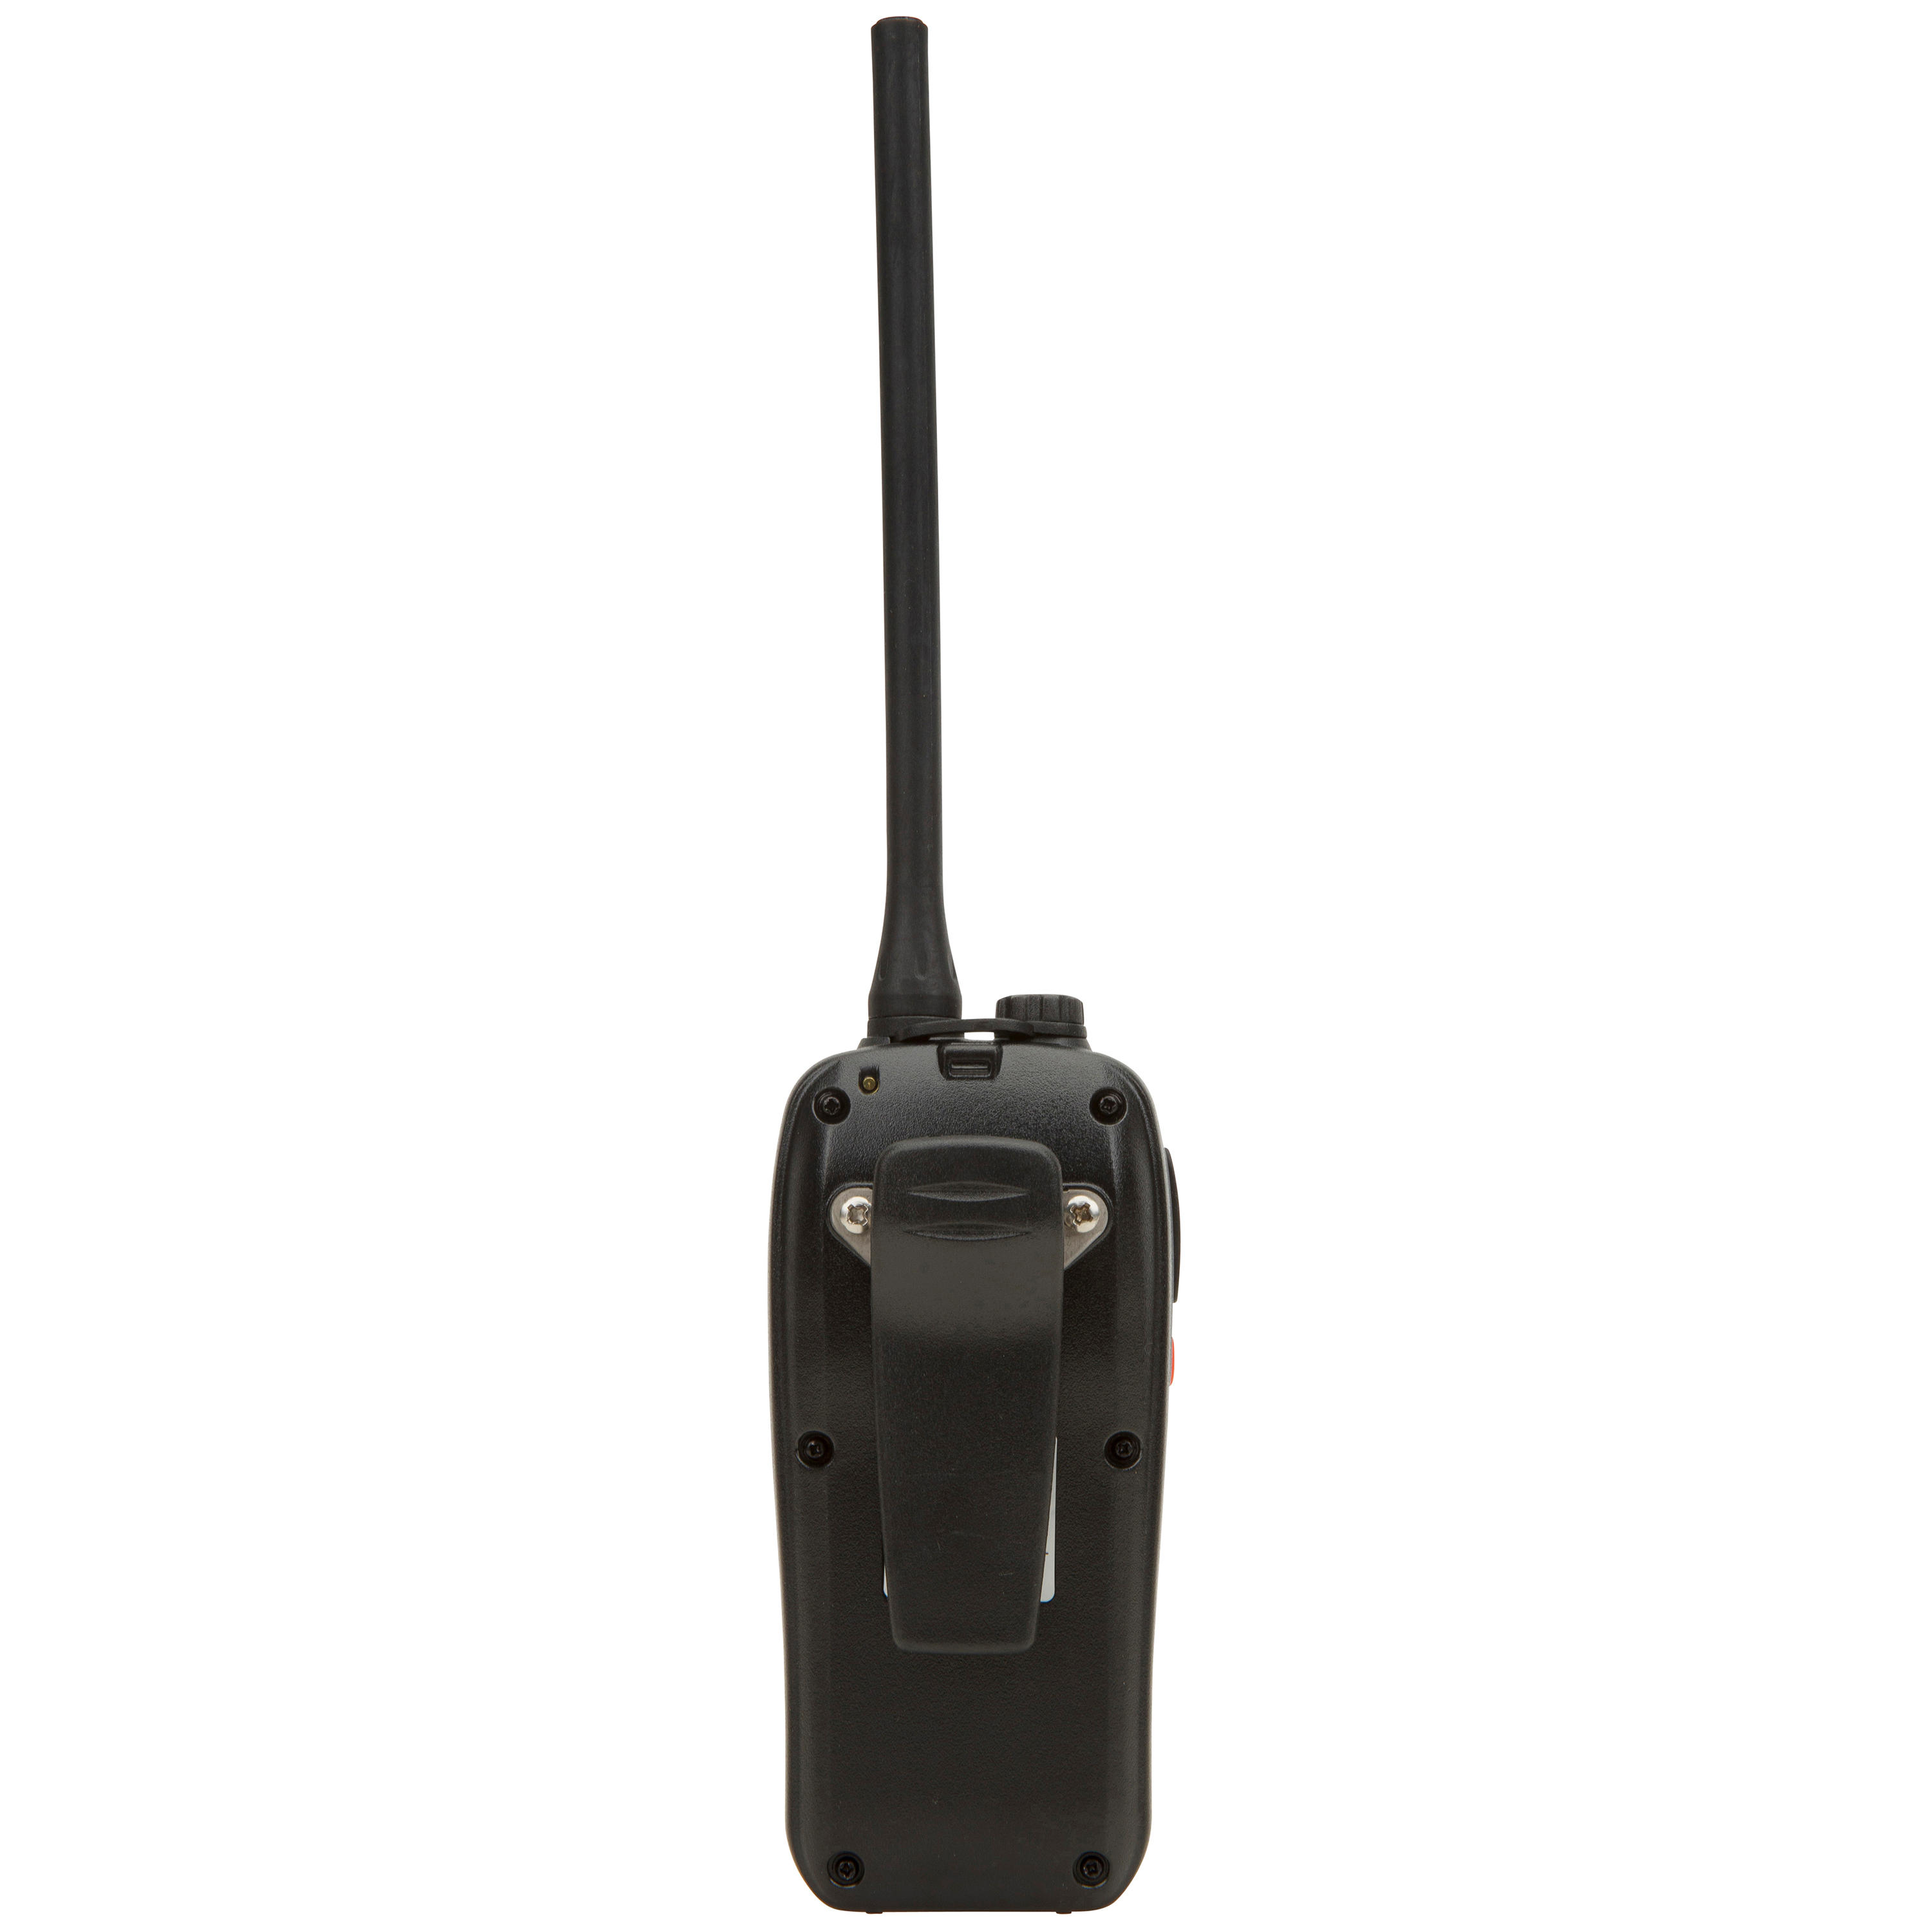 FLOATING VHF SX-400, WATERPROOF to IPX7 with flash and alarm 4/6